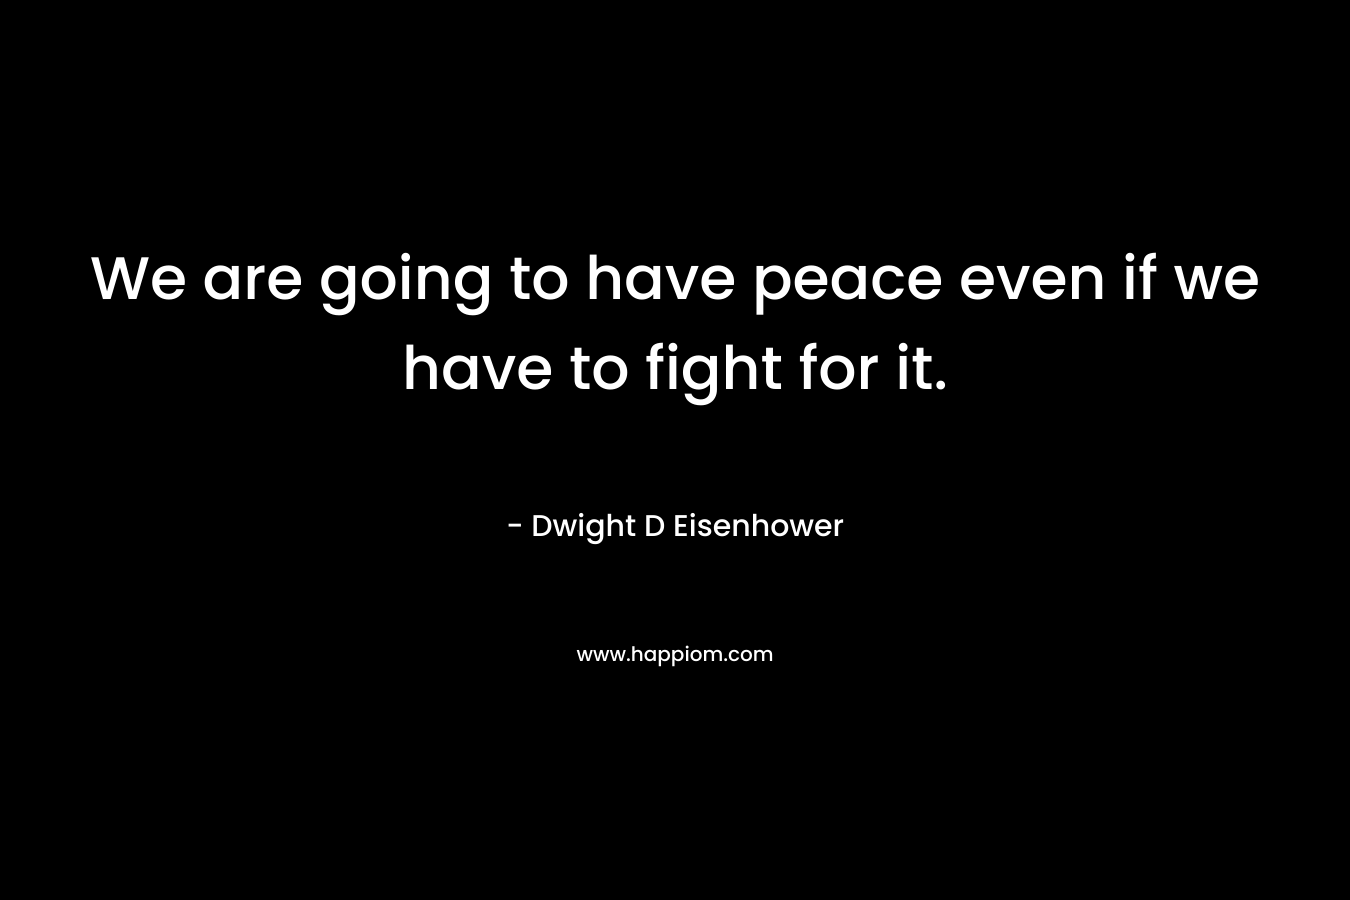 We are going to have peace even if we have to fight for it.